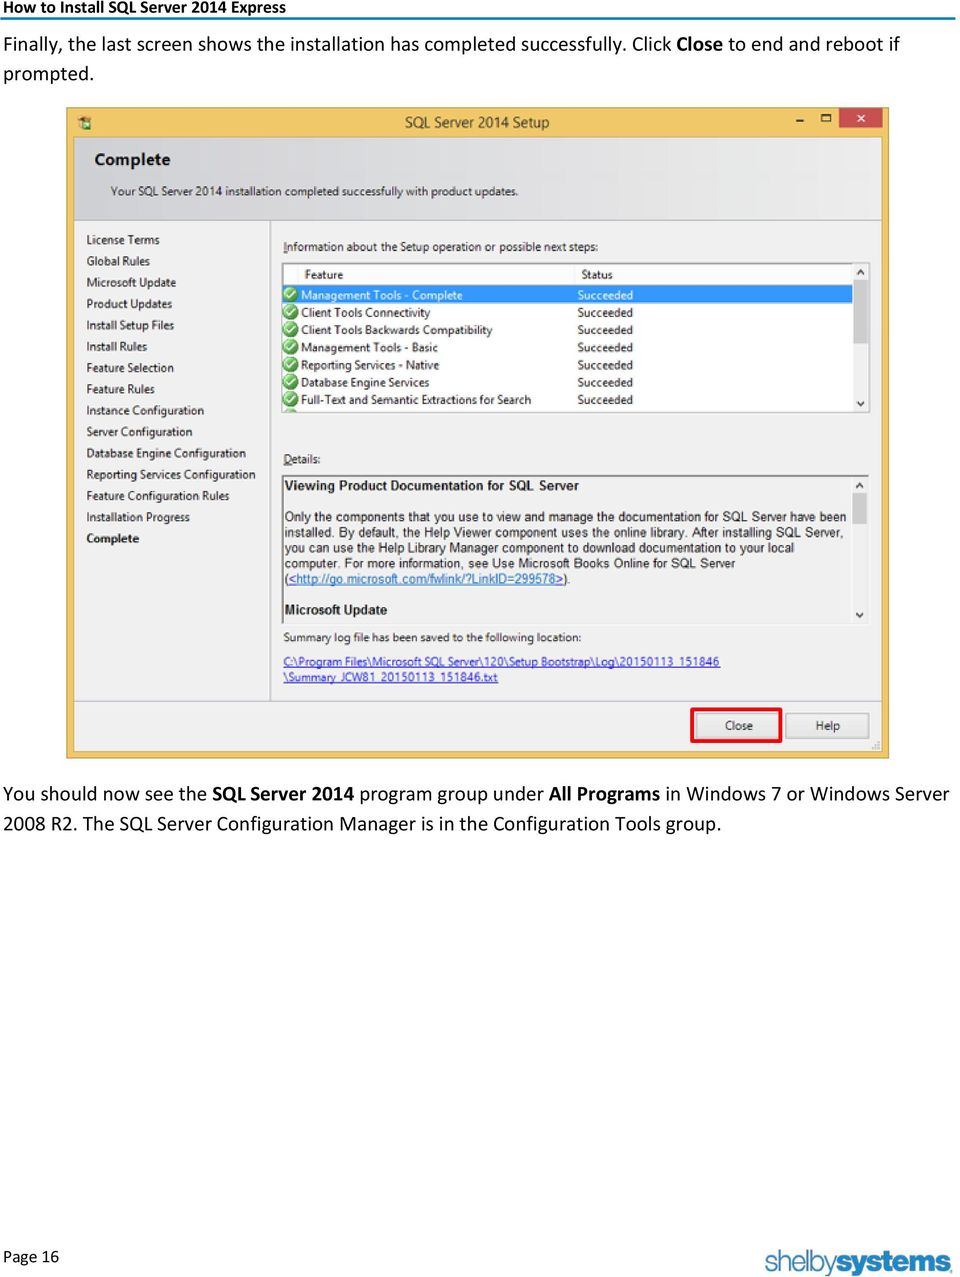 You should now see the SQL Server 2014 program group under All Programs in